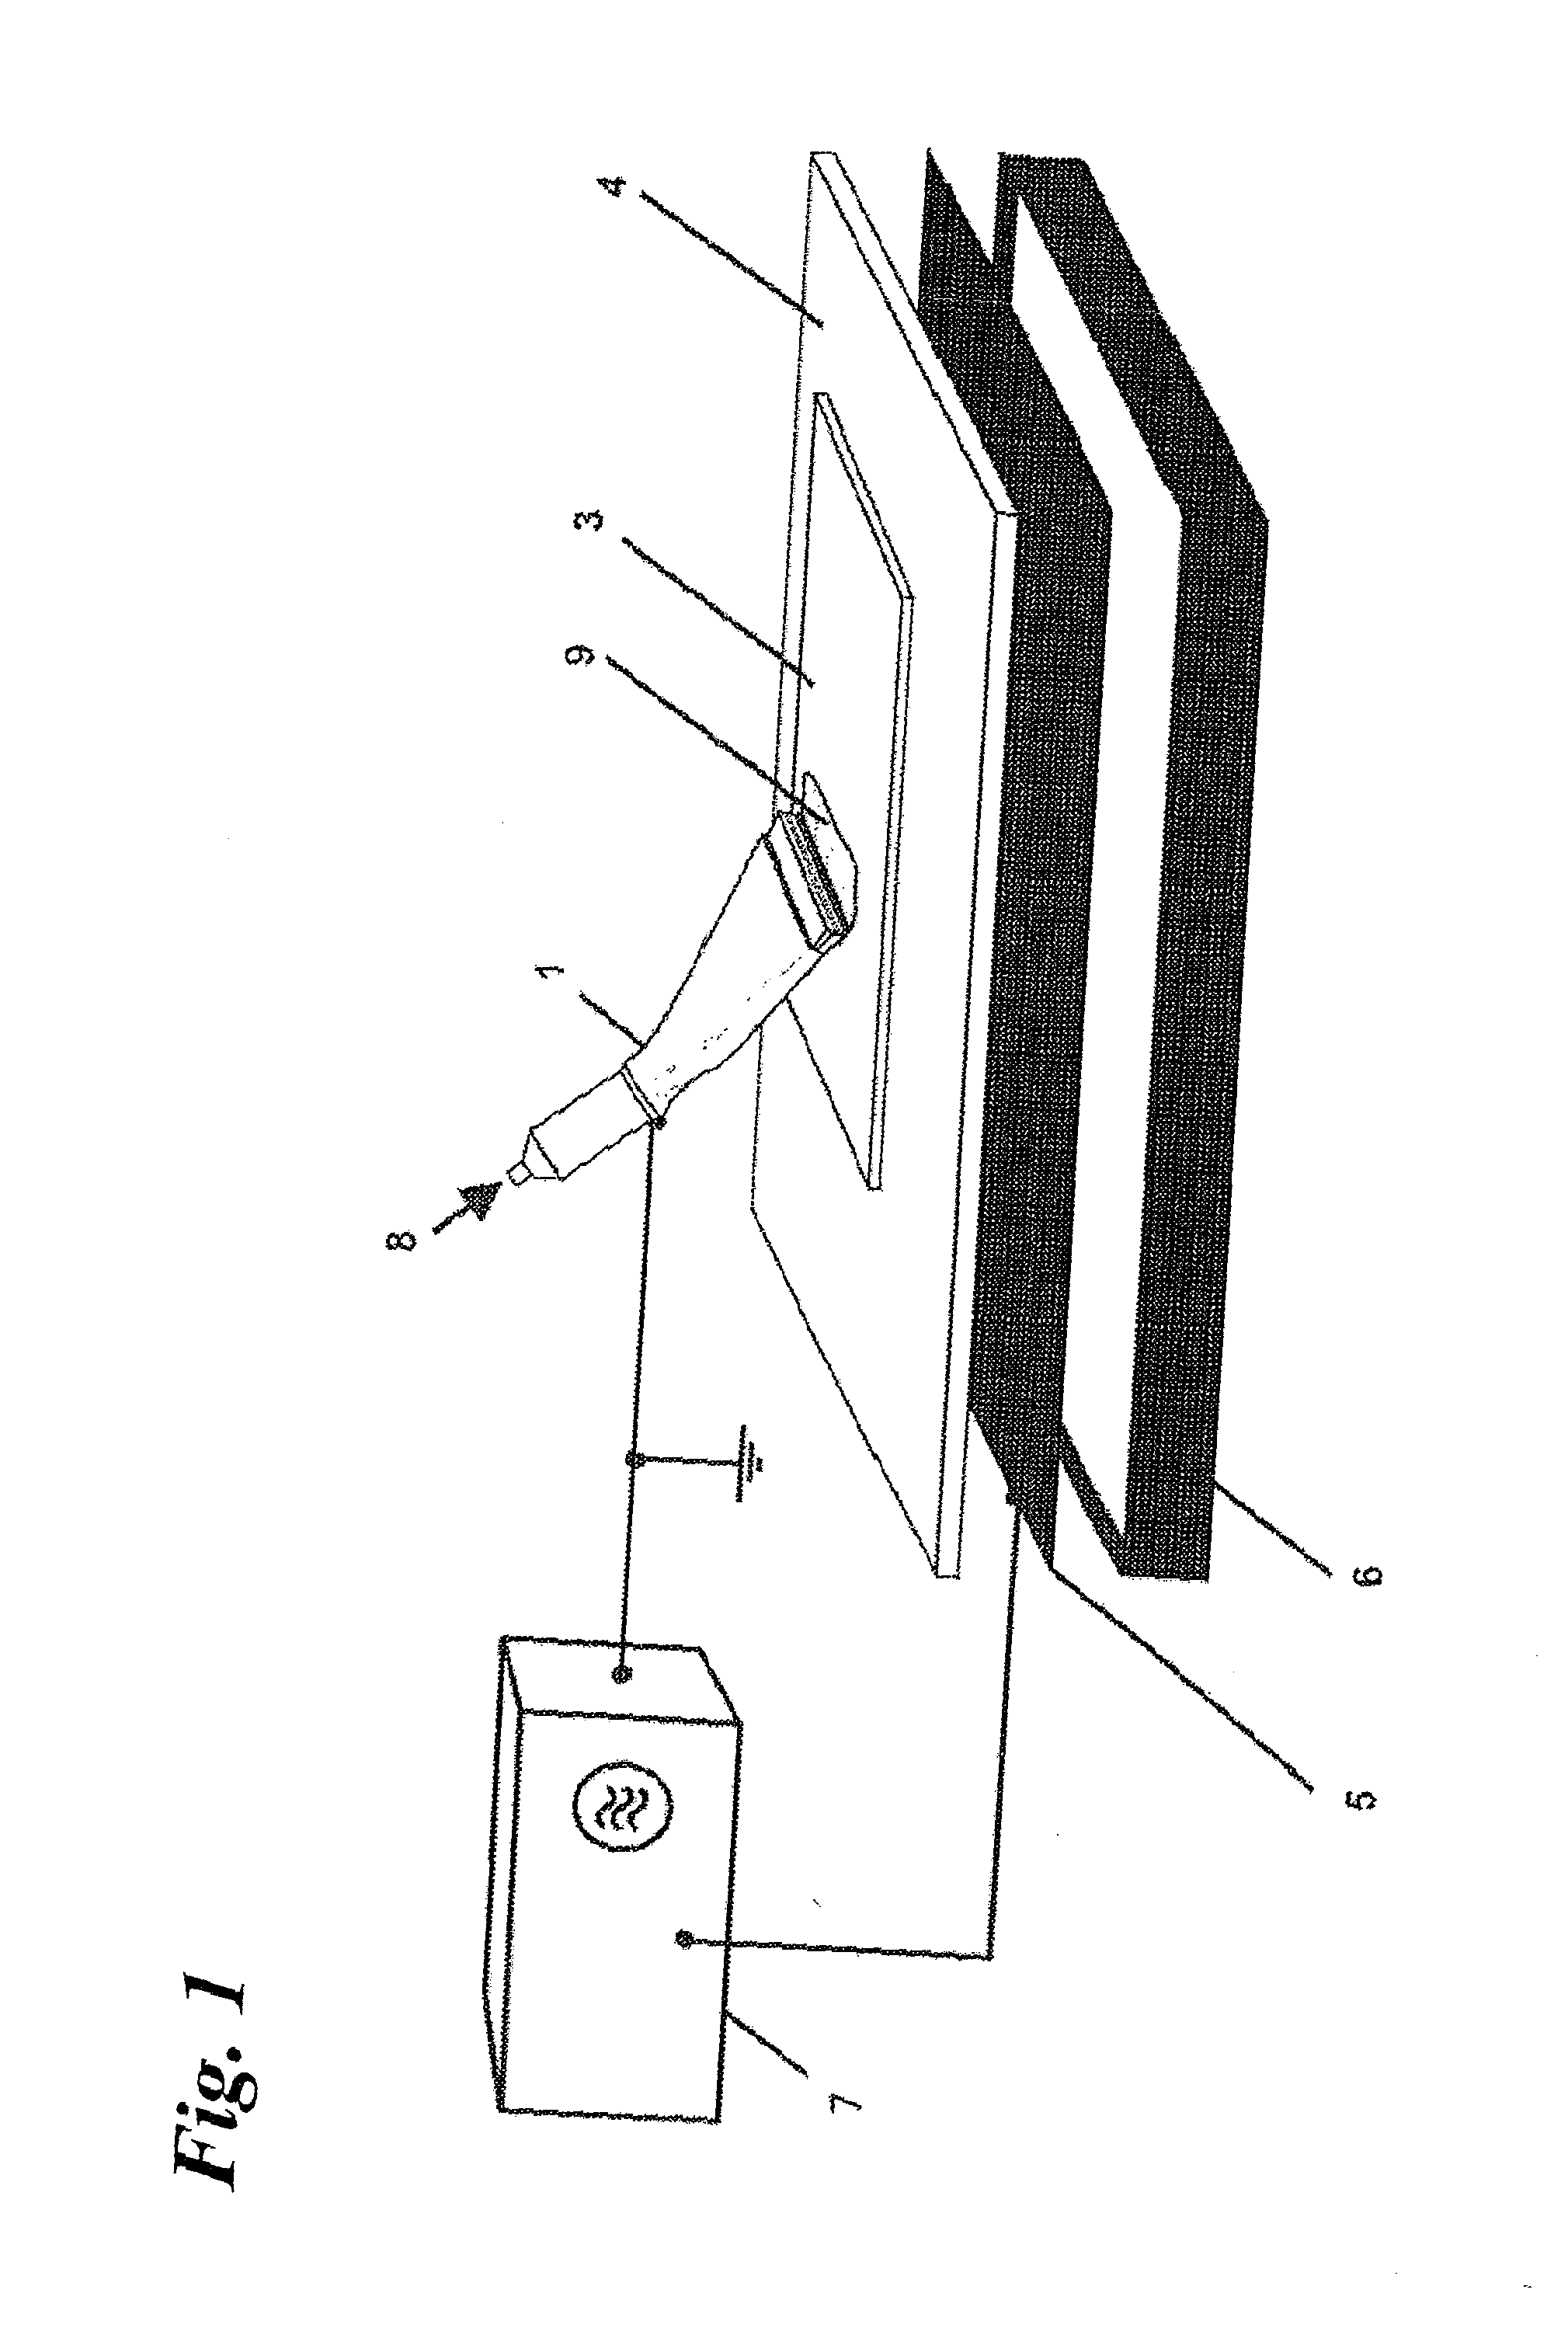 Method and device for plasma-supported surface treatment